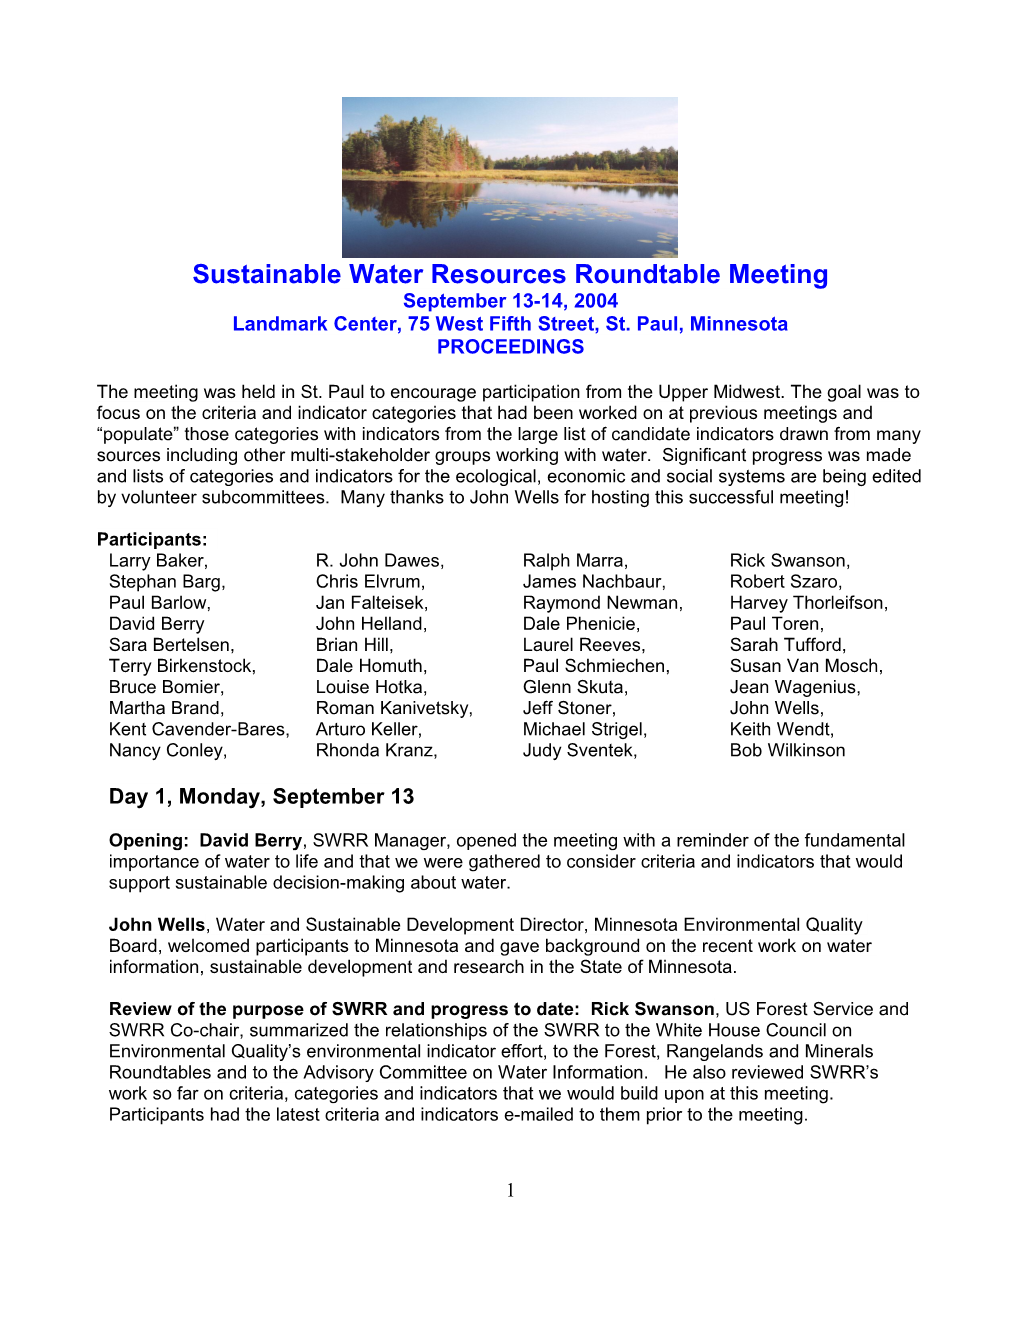 Sustainable Water Resources Roundtable (SWRR)